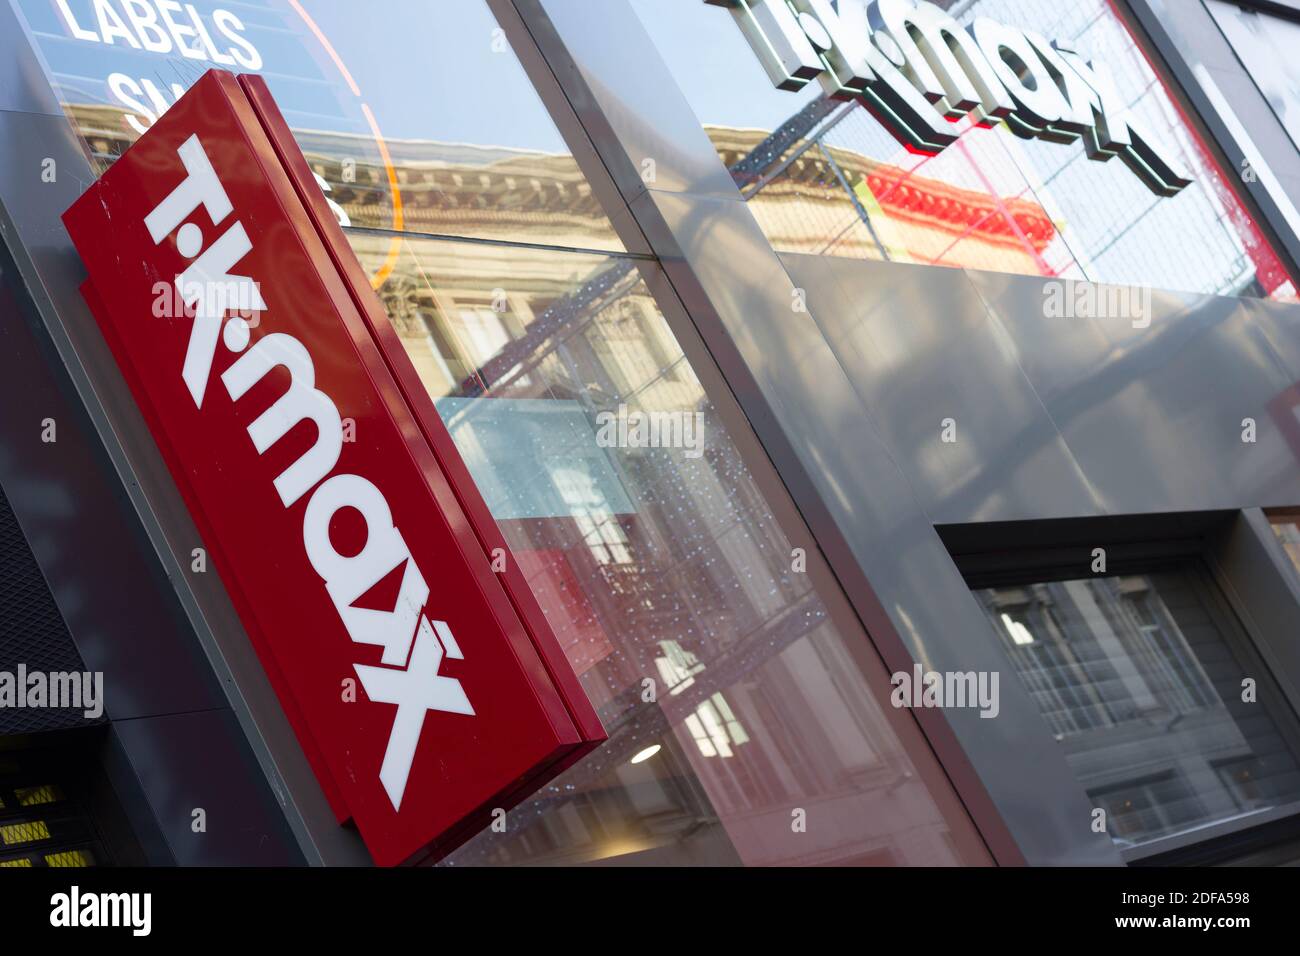 TKmaxx logo with white lettering in Red  background  on Store front on Oxford street, London, England Stock Photo